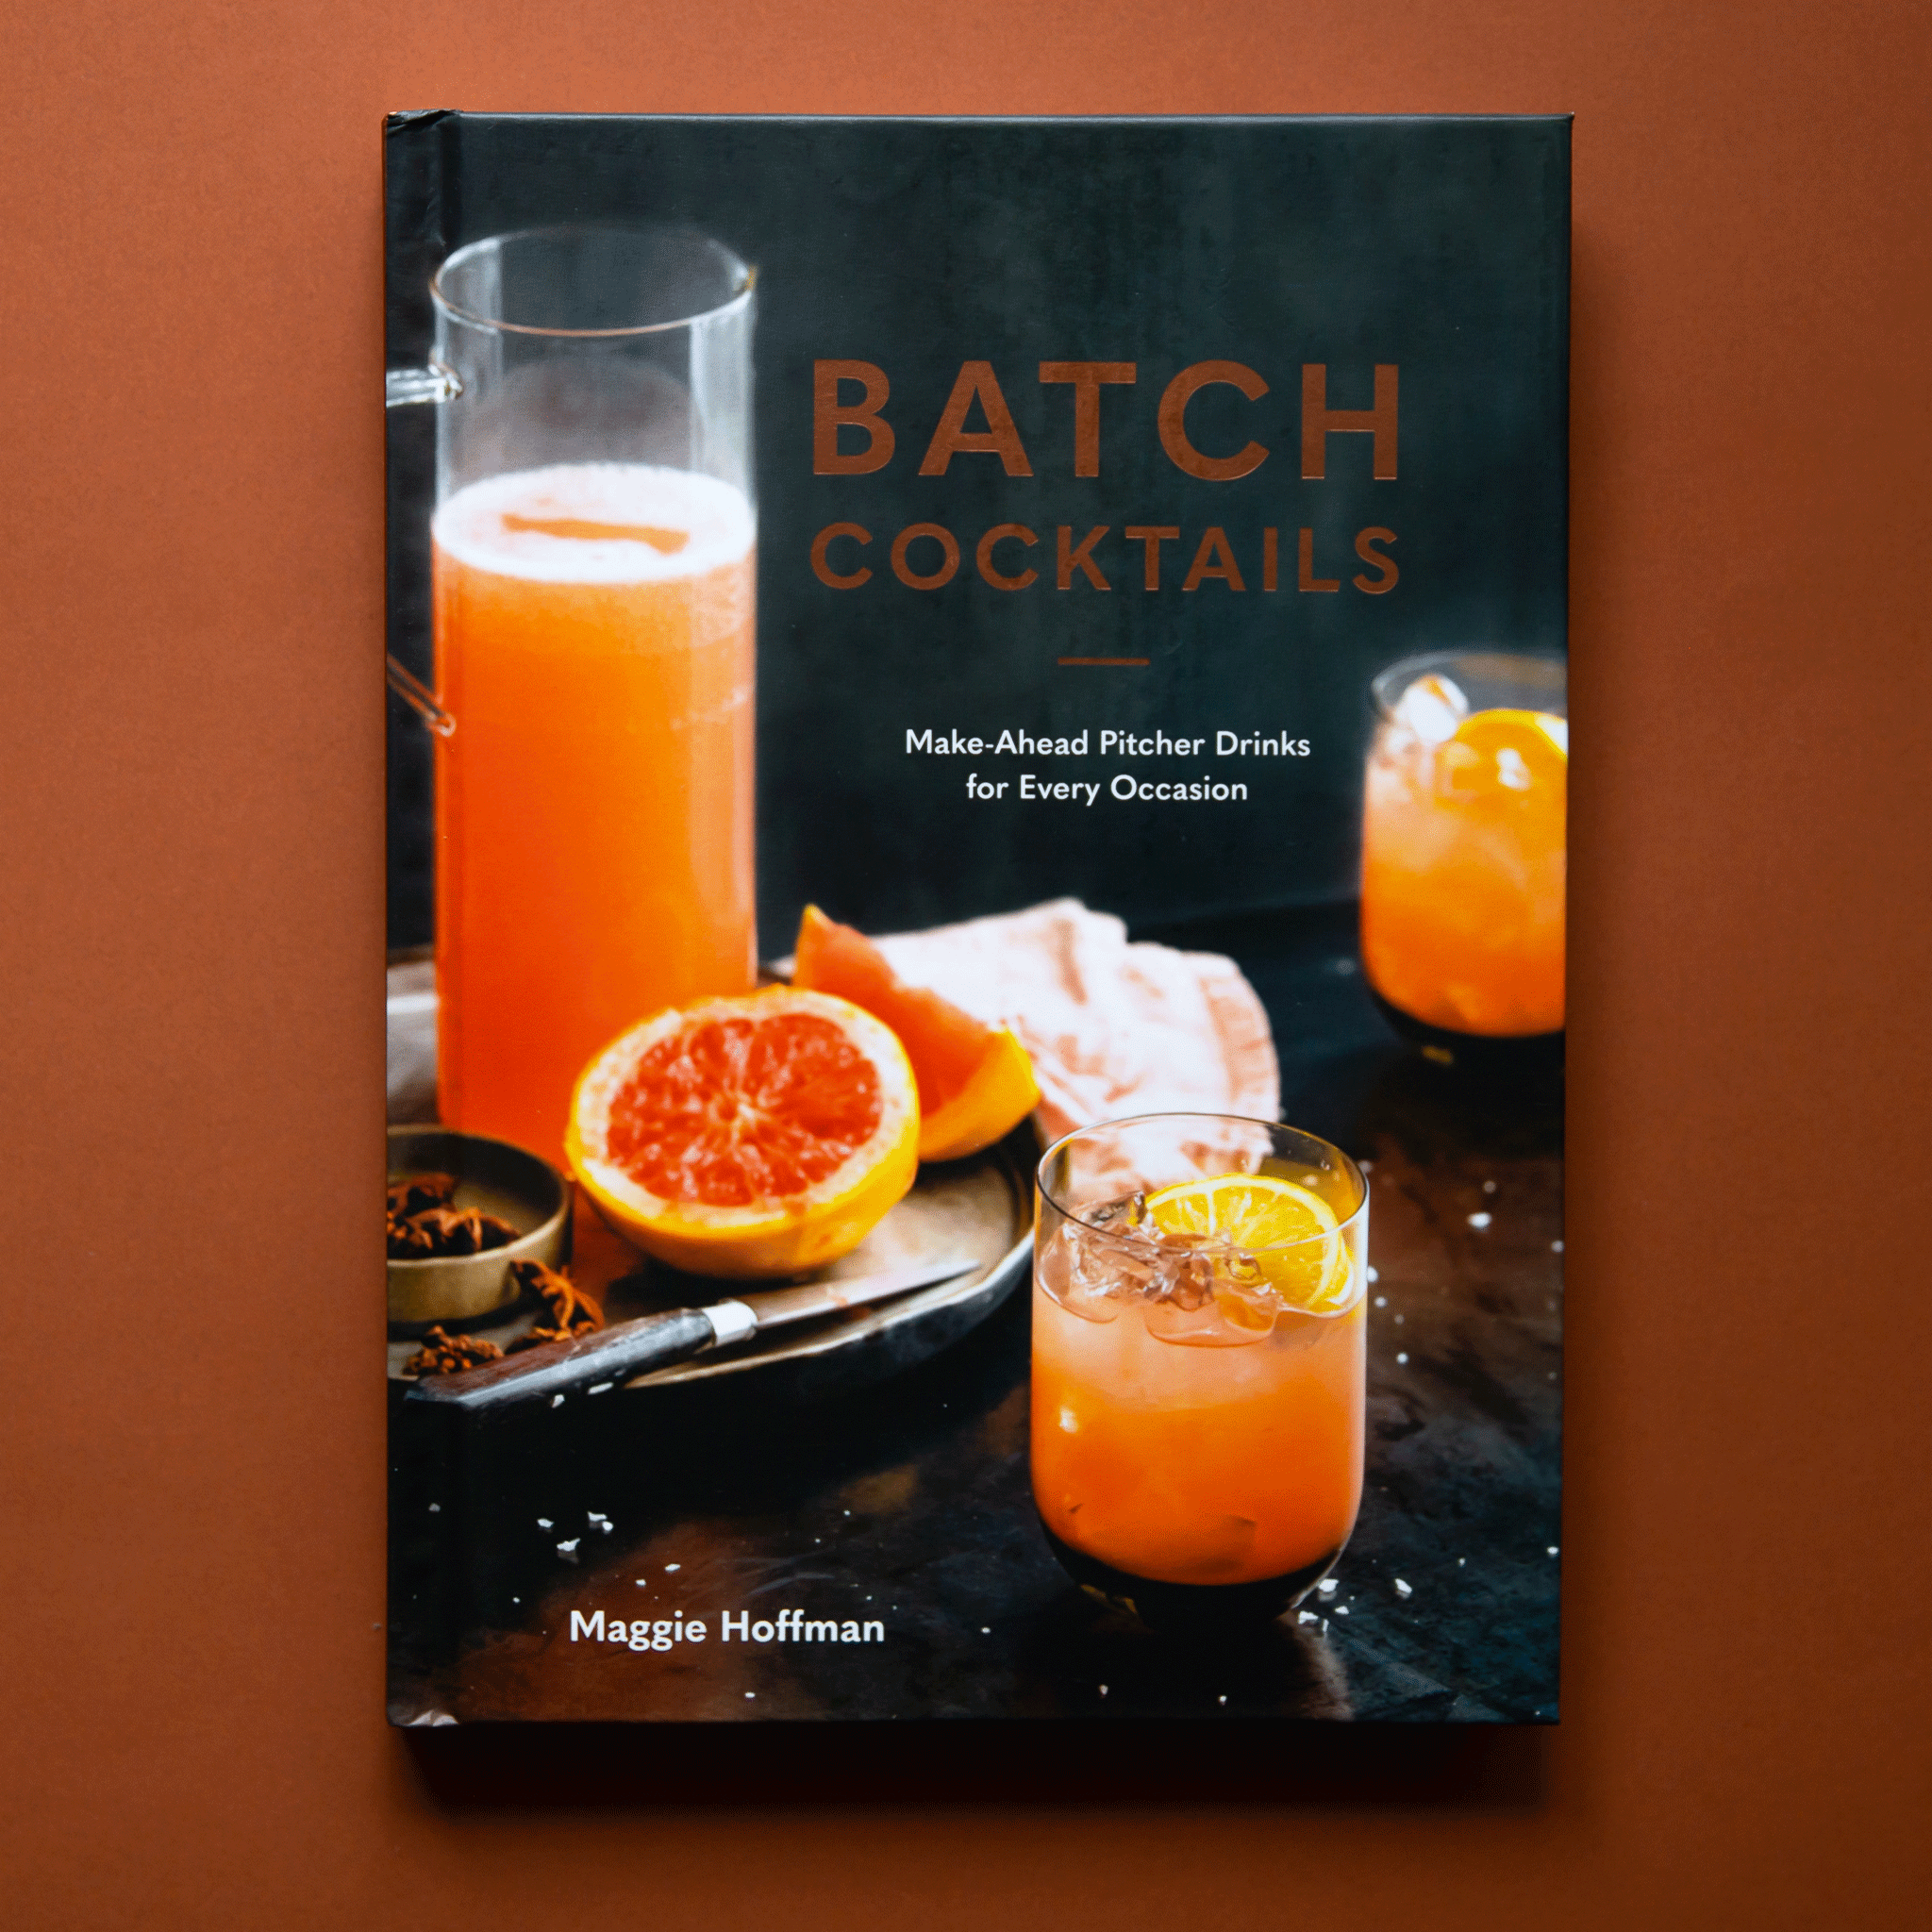 Cocktail book titled &quot;Batch Cocktails. Make-Ahead Pitcher Drinks for Every Occasion. Maggie Hoffman.&quot; The cover image shows a tray with a pitcher of tangerine liquid, a sliced blood orange, and a knife. Two tangerine colored cocktails with lemon garnishes sit beside the tray.